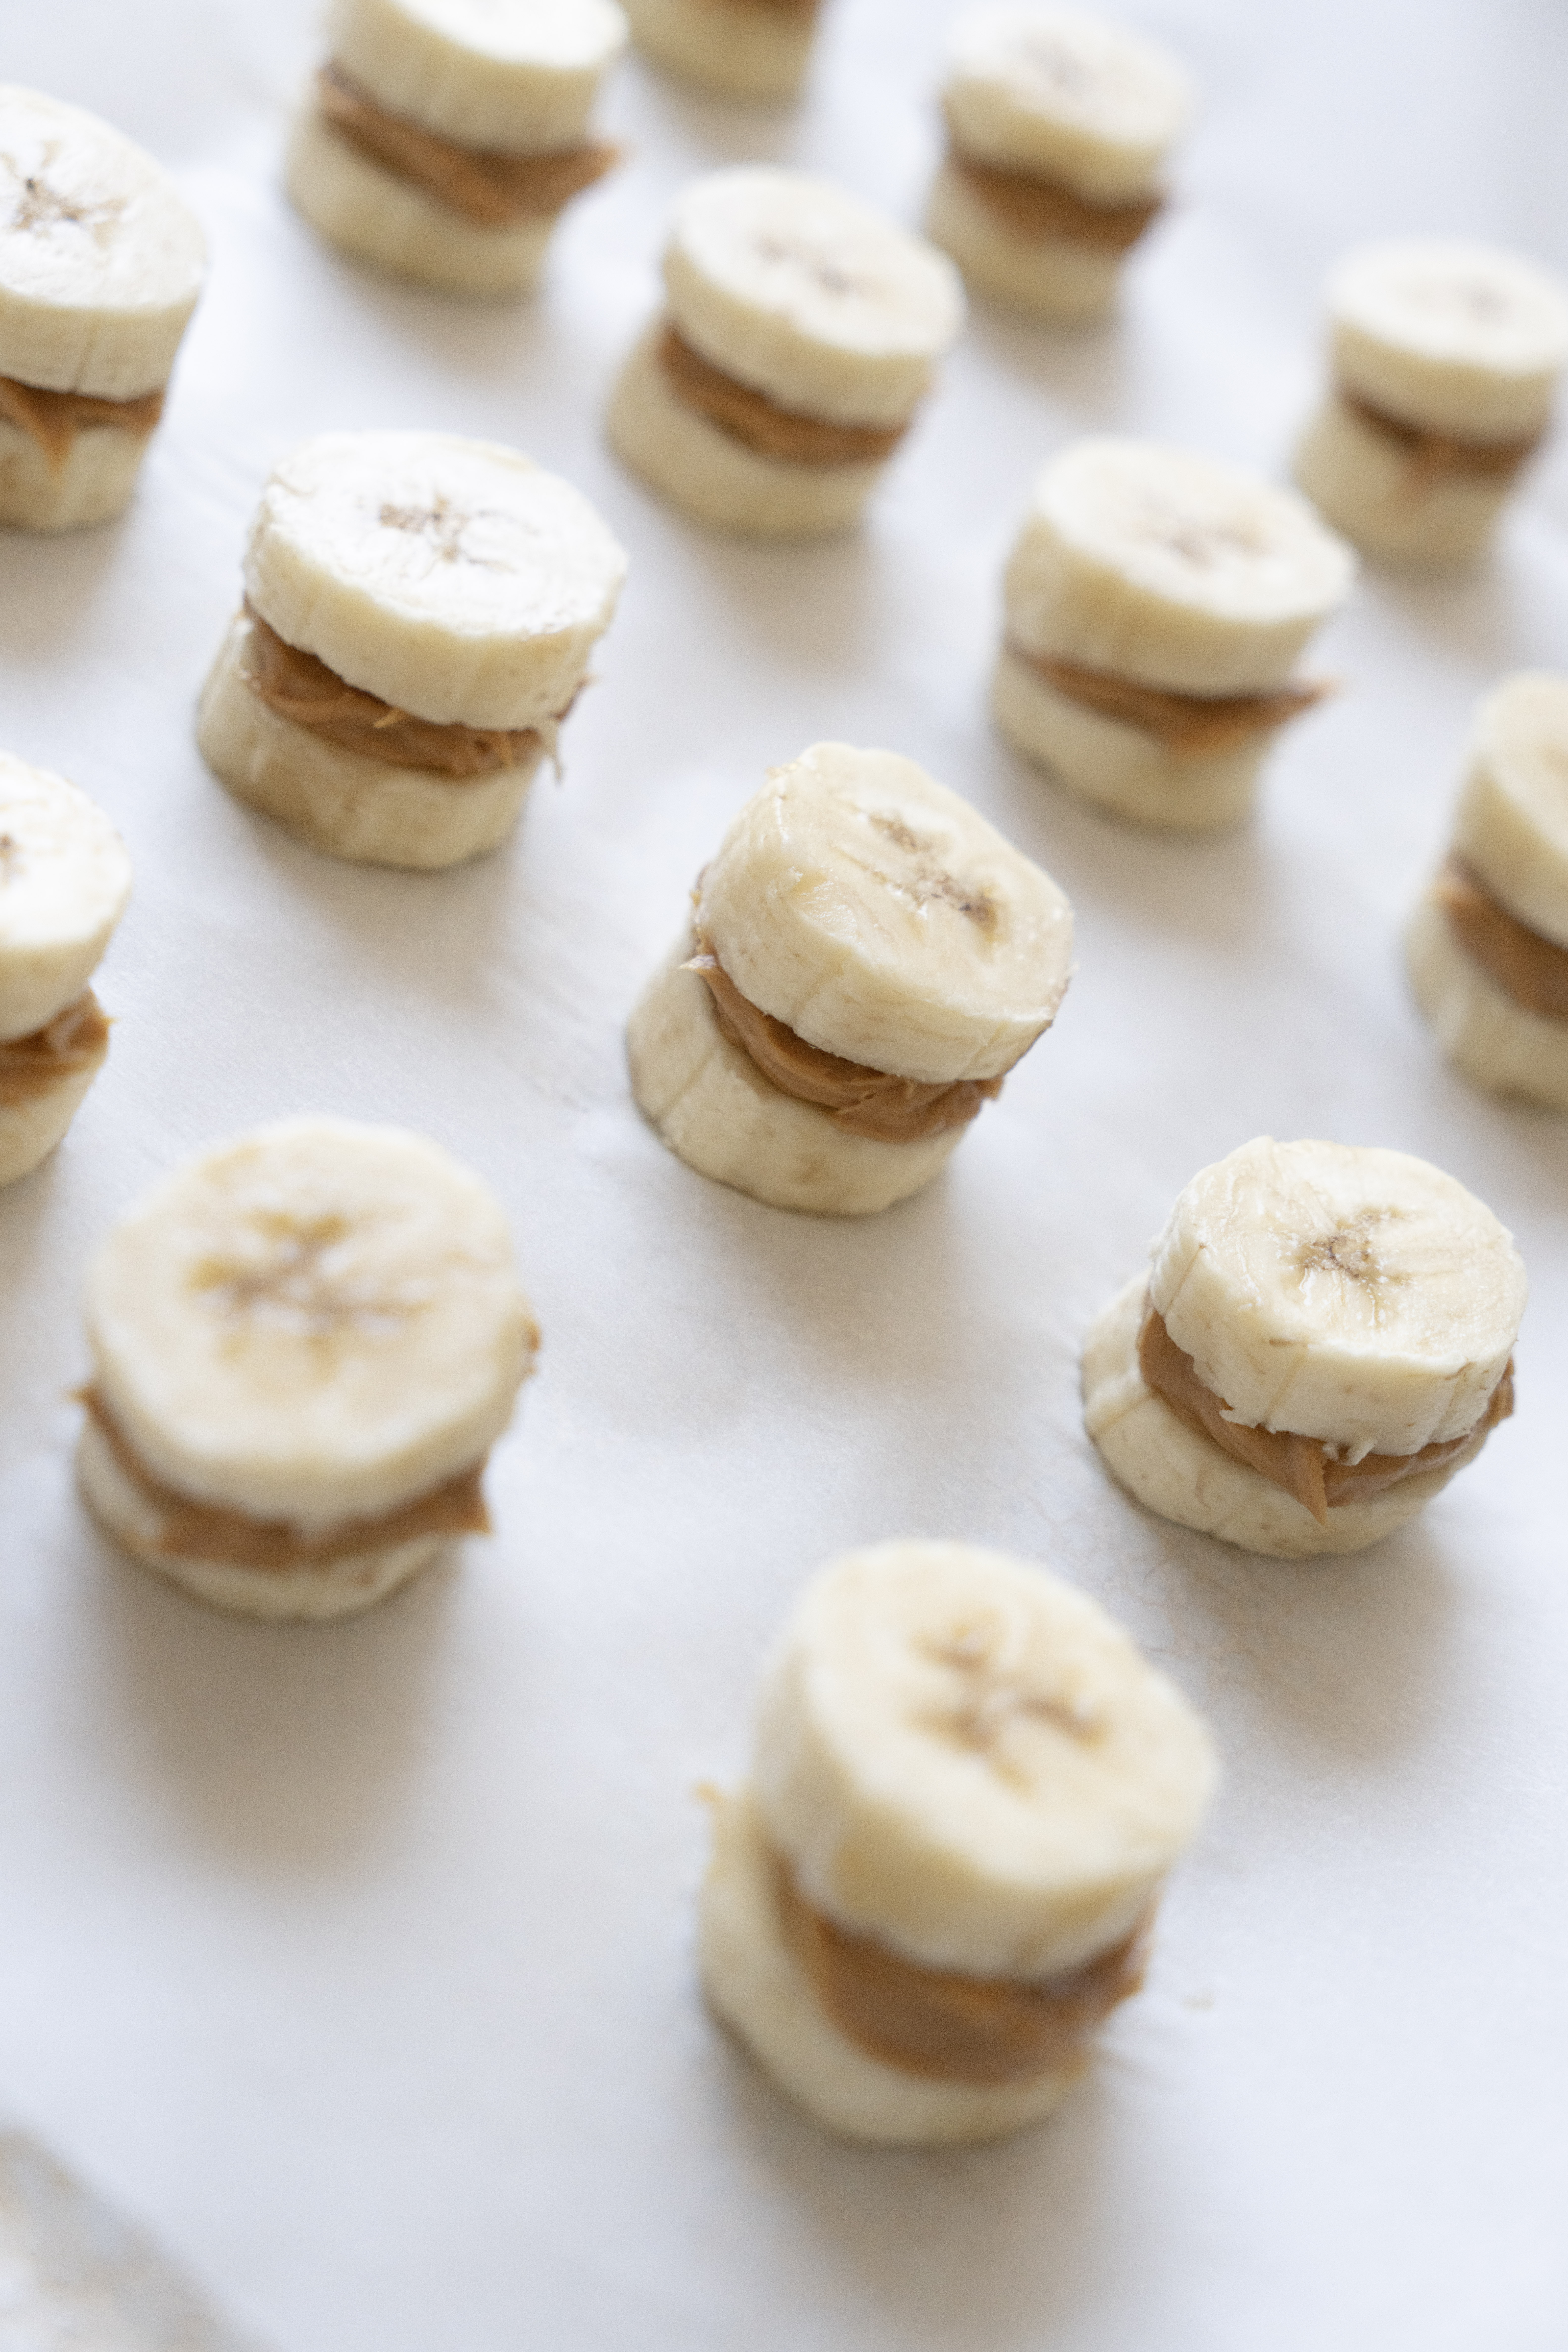 peanut butter banana bites with no choclate